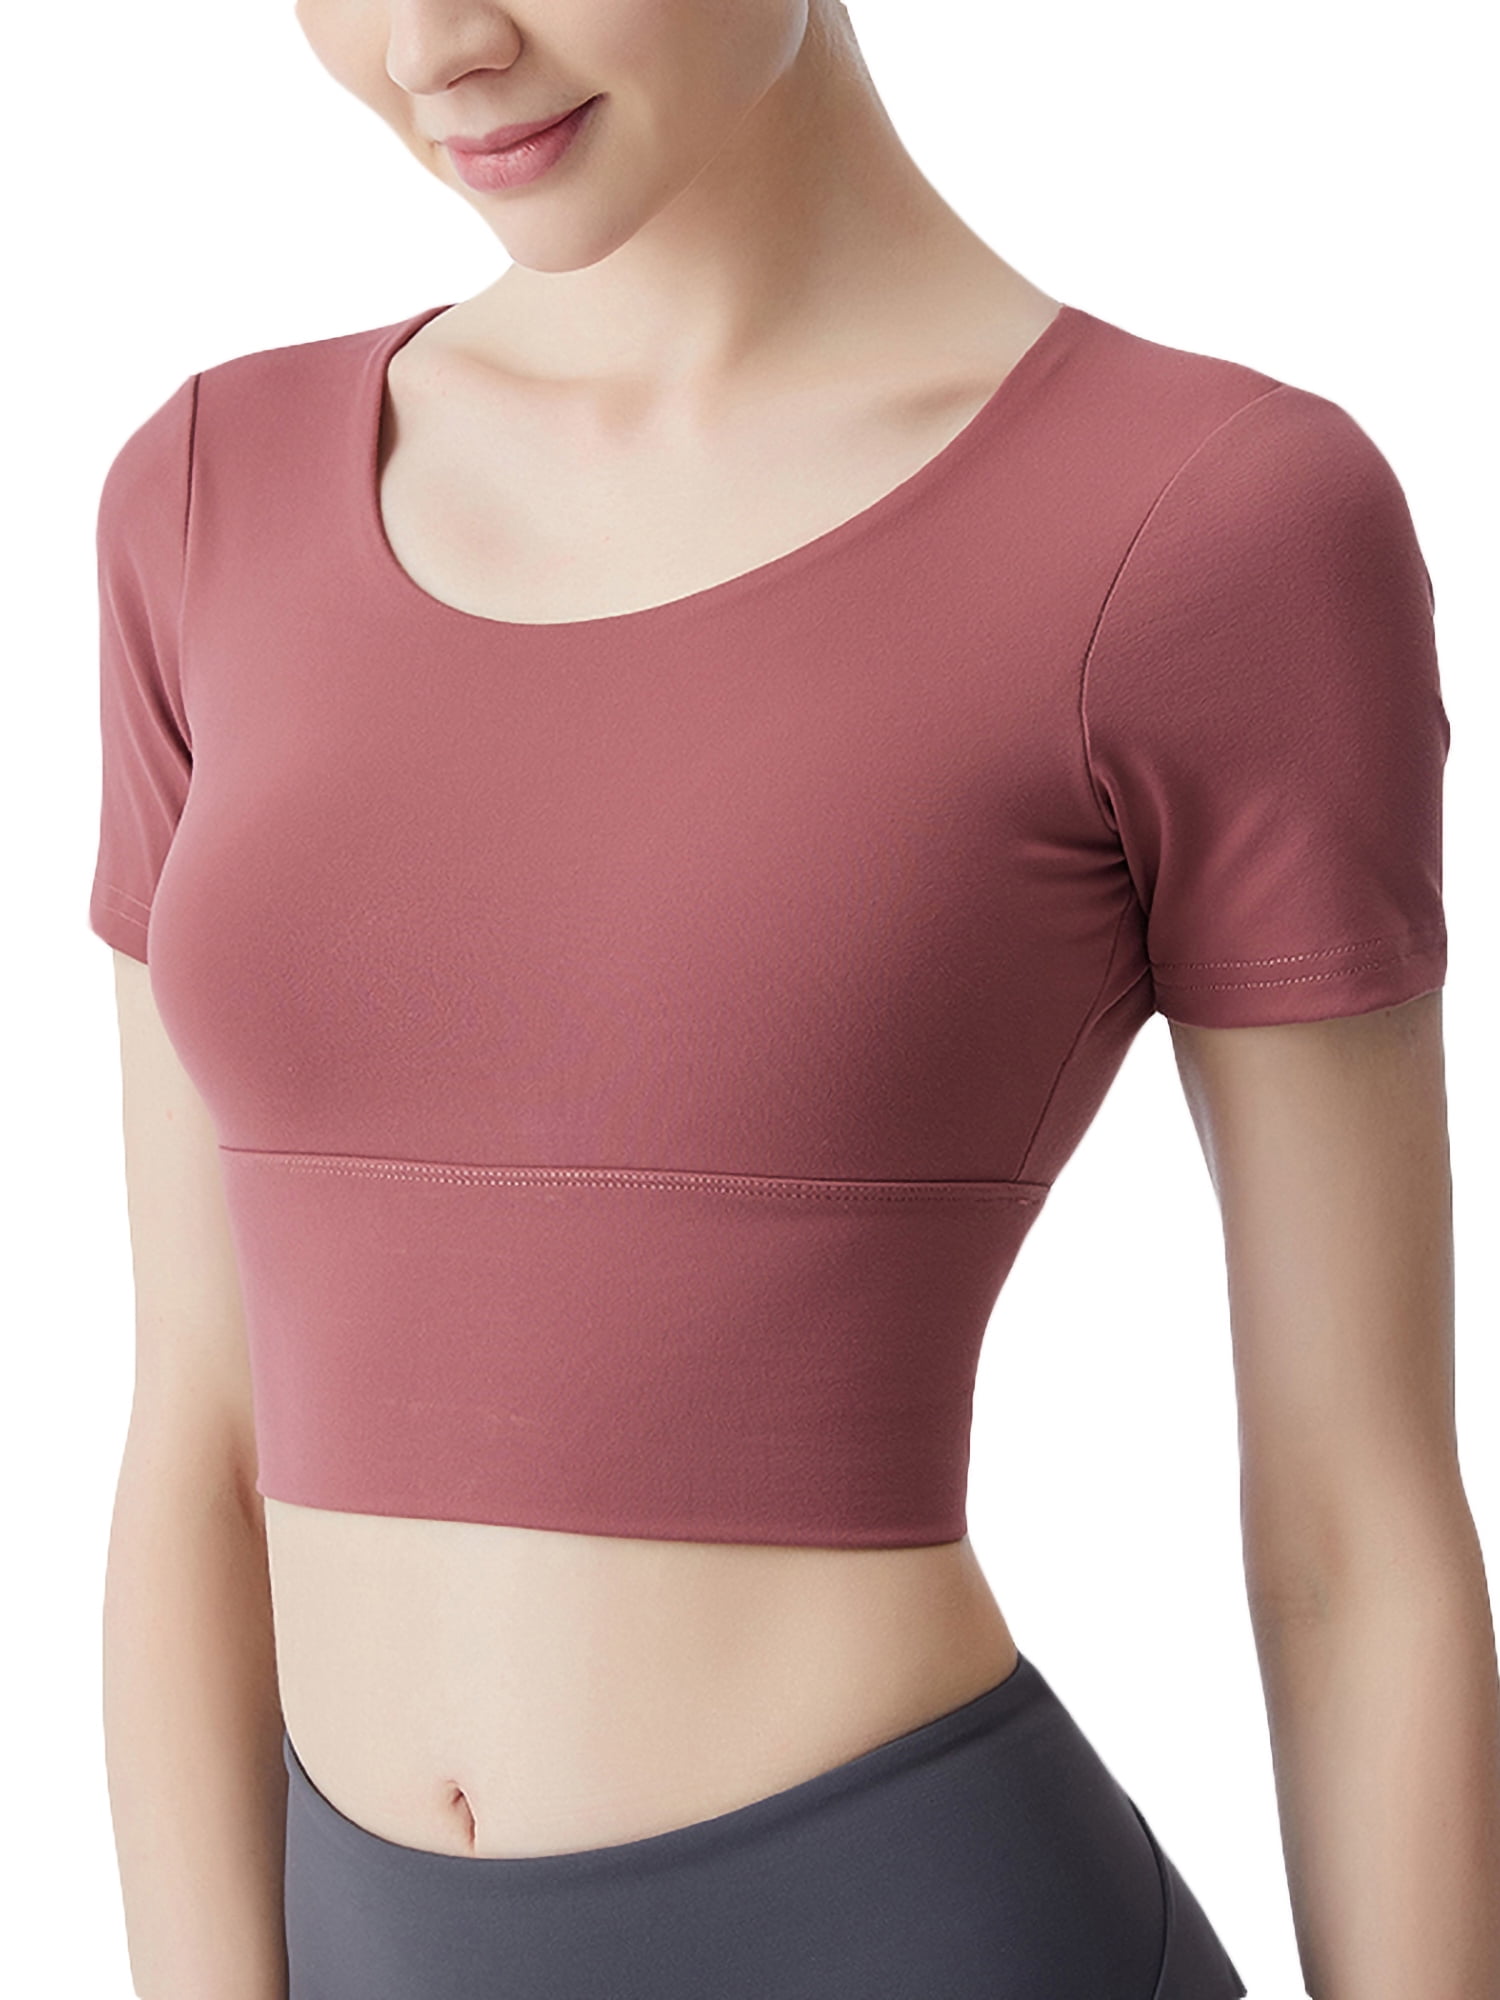 CYDREAM Workout Crop Top for Women Yoga Cami Tank Tops Athletic Sports Shirts Slim Fit Built in Bra Mesh Back Short Sleeves 